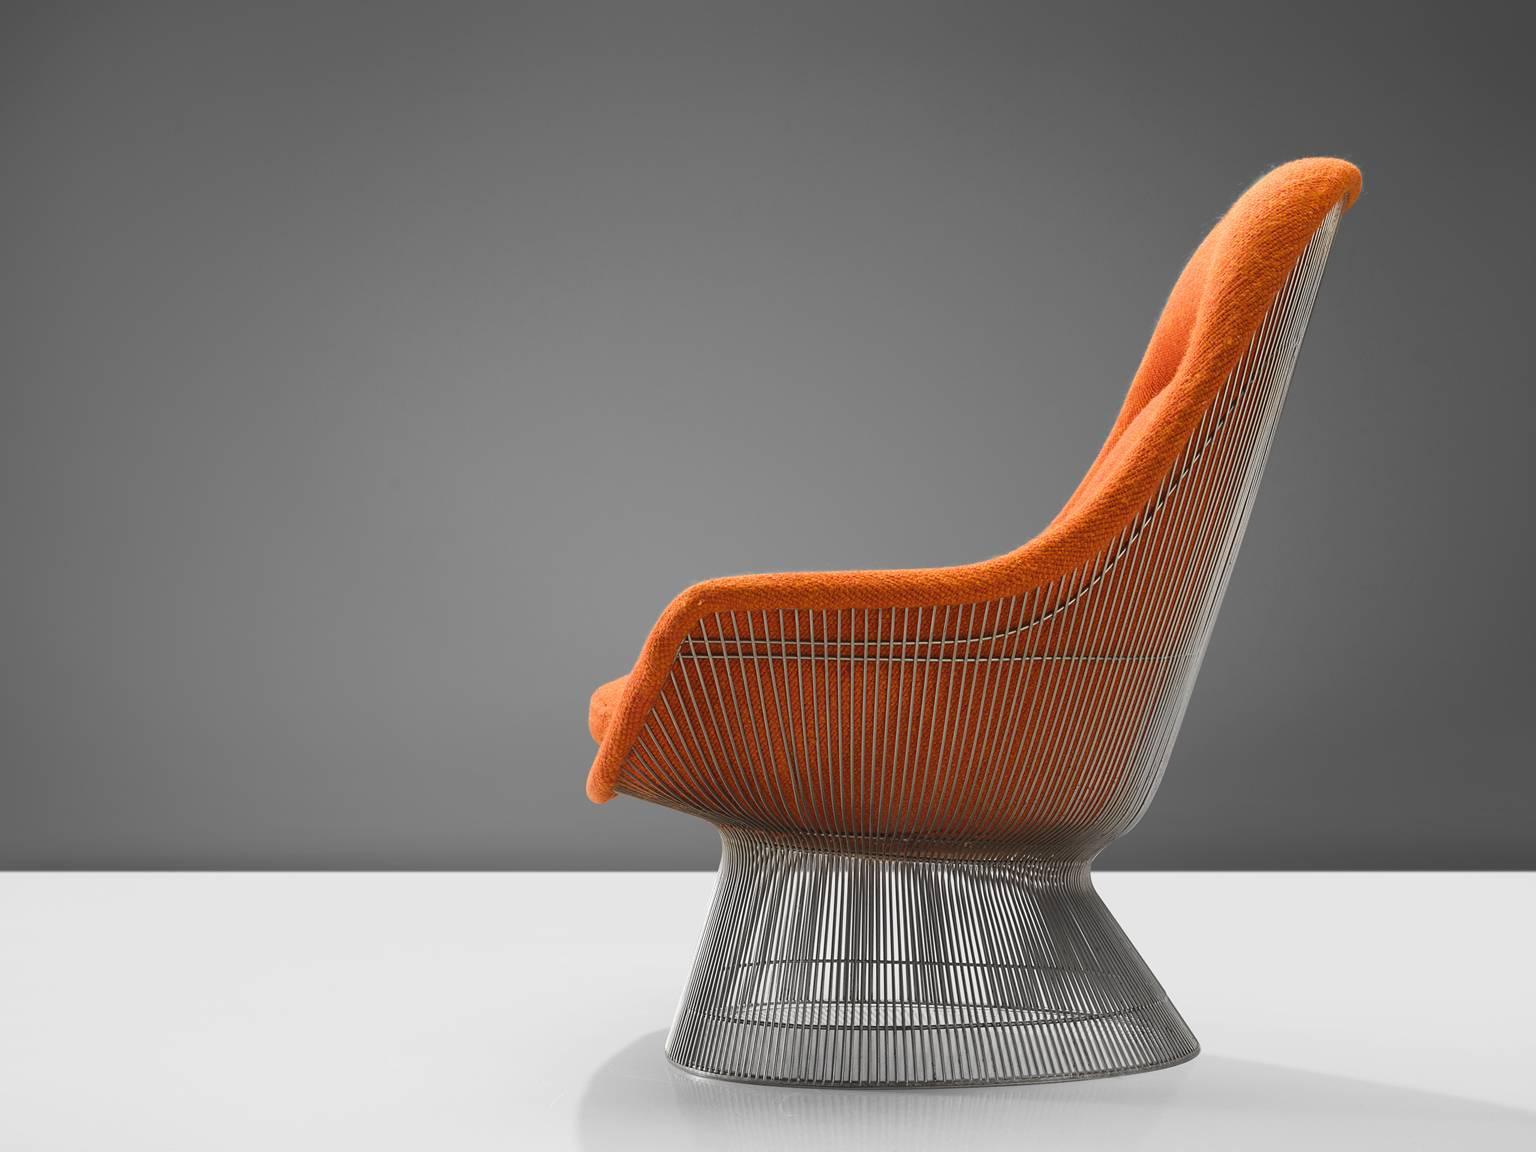 Warren Platner for Knoll, easy chair 'model 1705', nickelled steel and original orange fabric, United States, design 1966, production later

This iconic orange easy chair by Warren Platner is created by welding curved steel rods to circular and